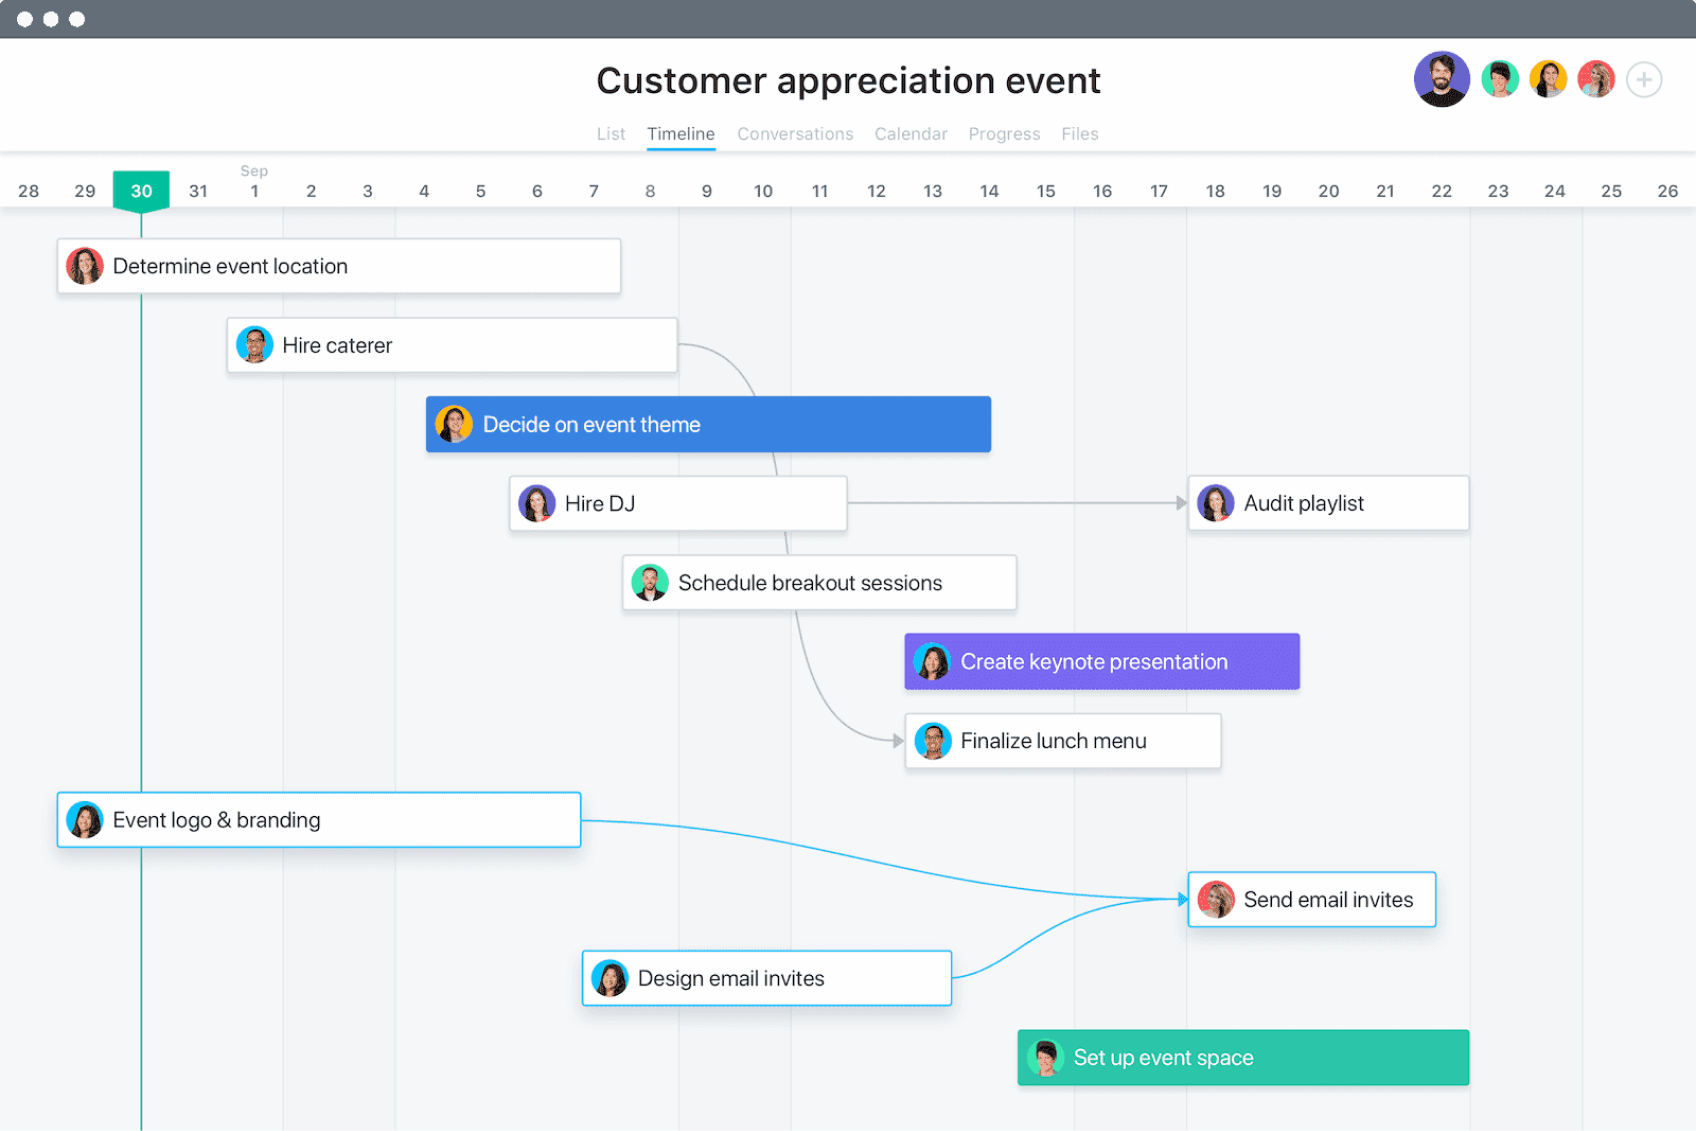 [Timeline View] Customer appreciation event project in Asana